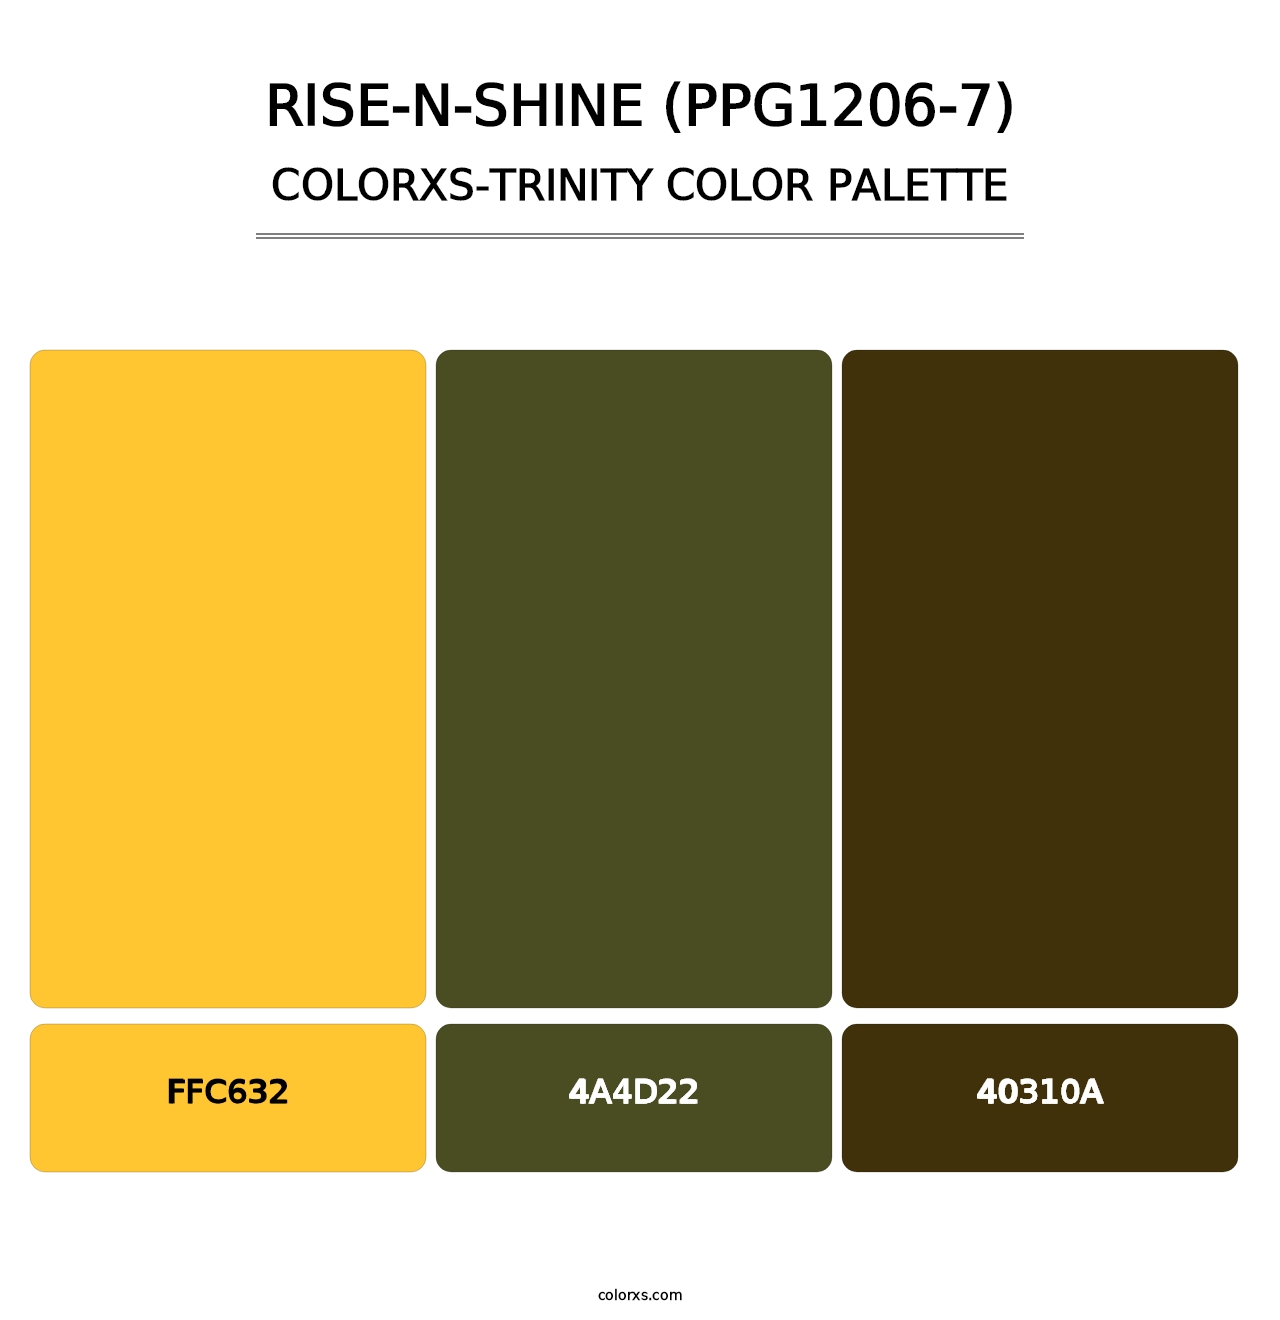 Rise-N-Shine (PPG1206-7) - Colorxs Trinity Palette